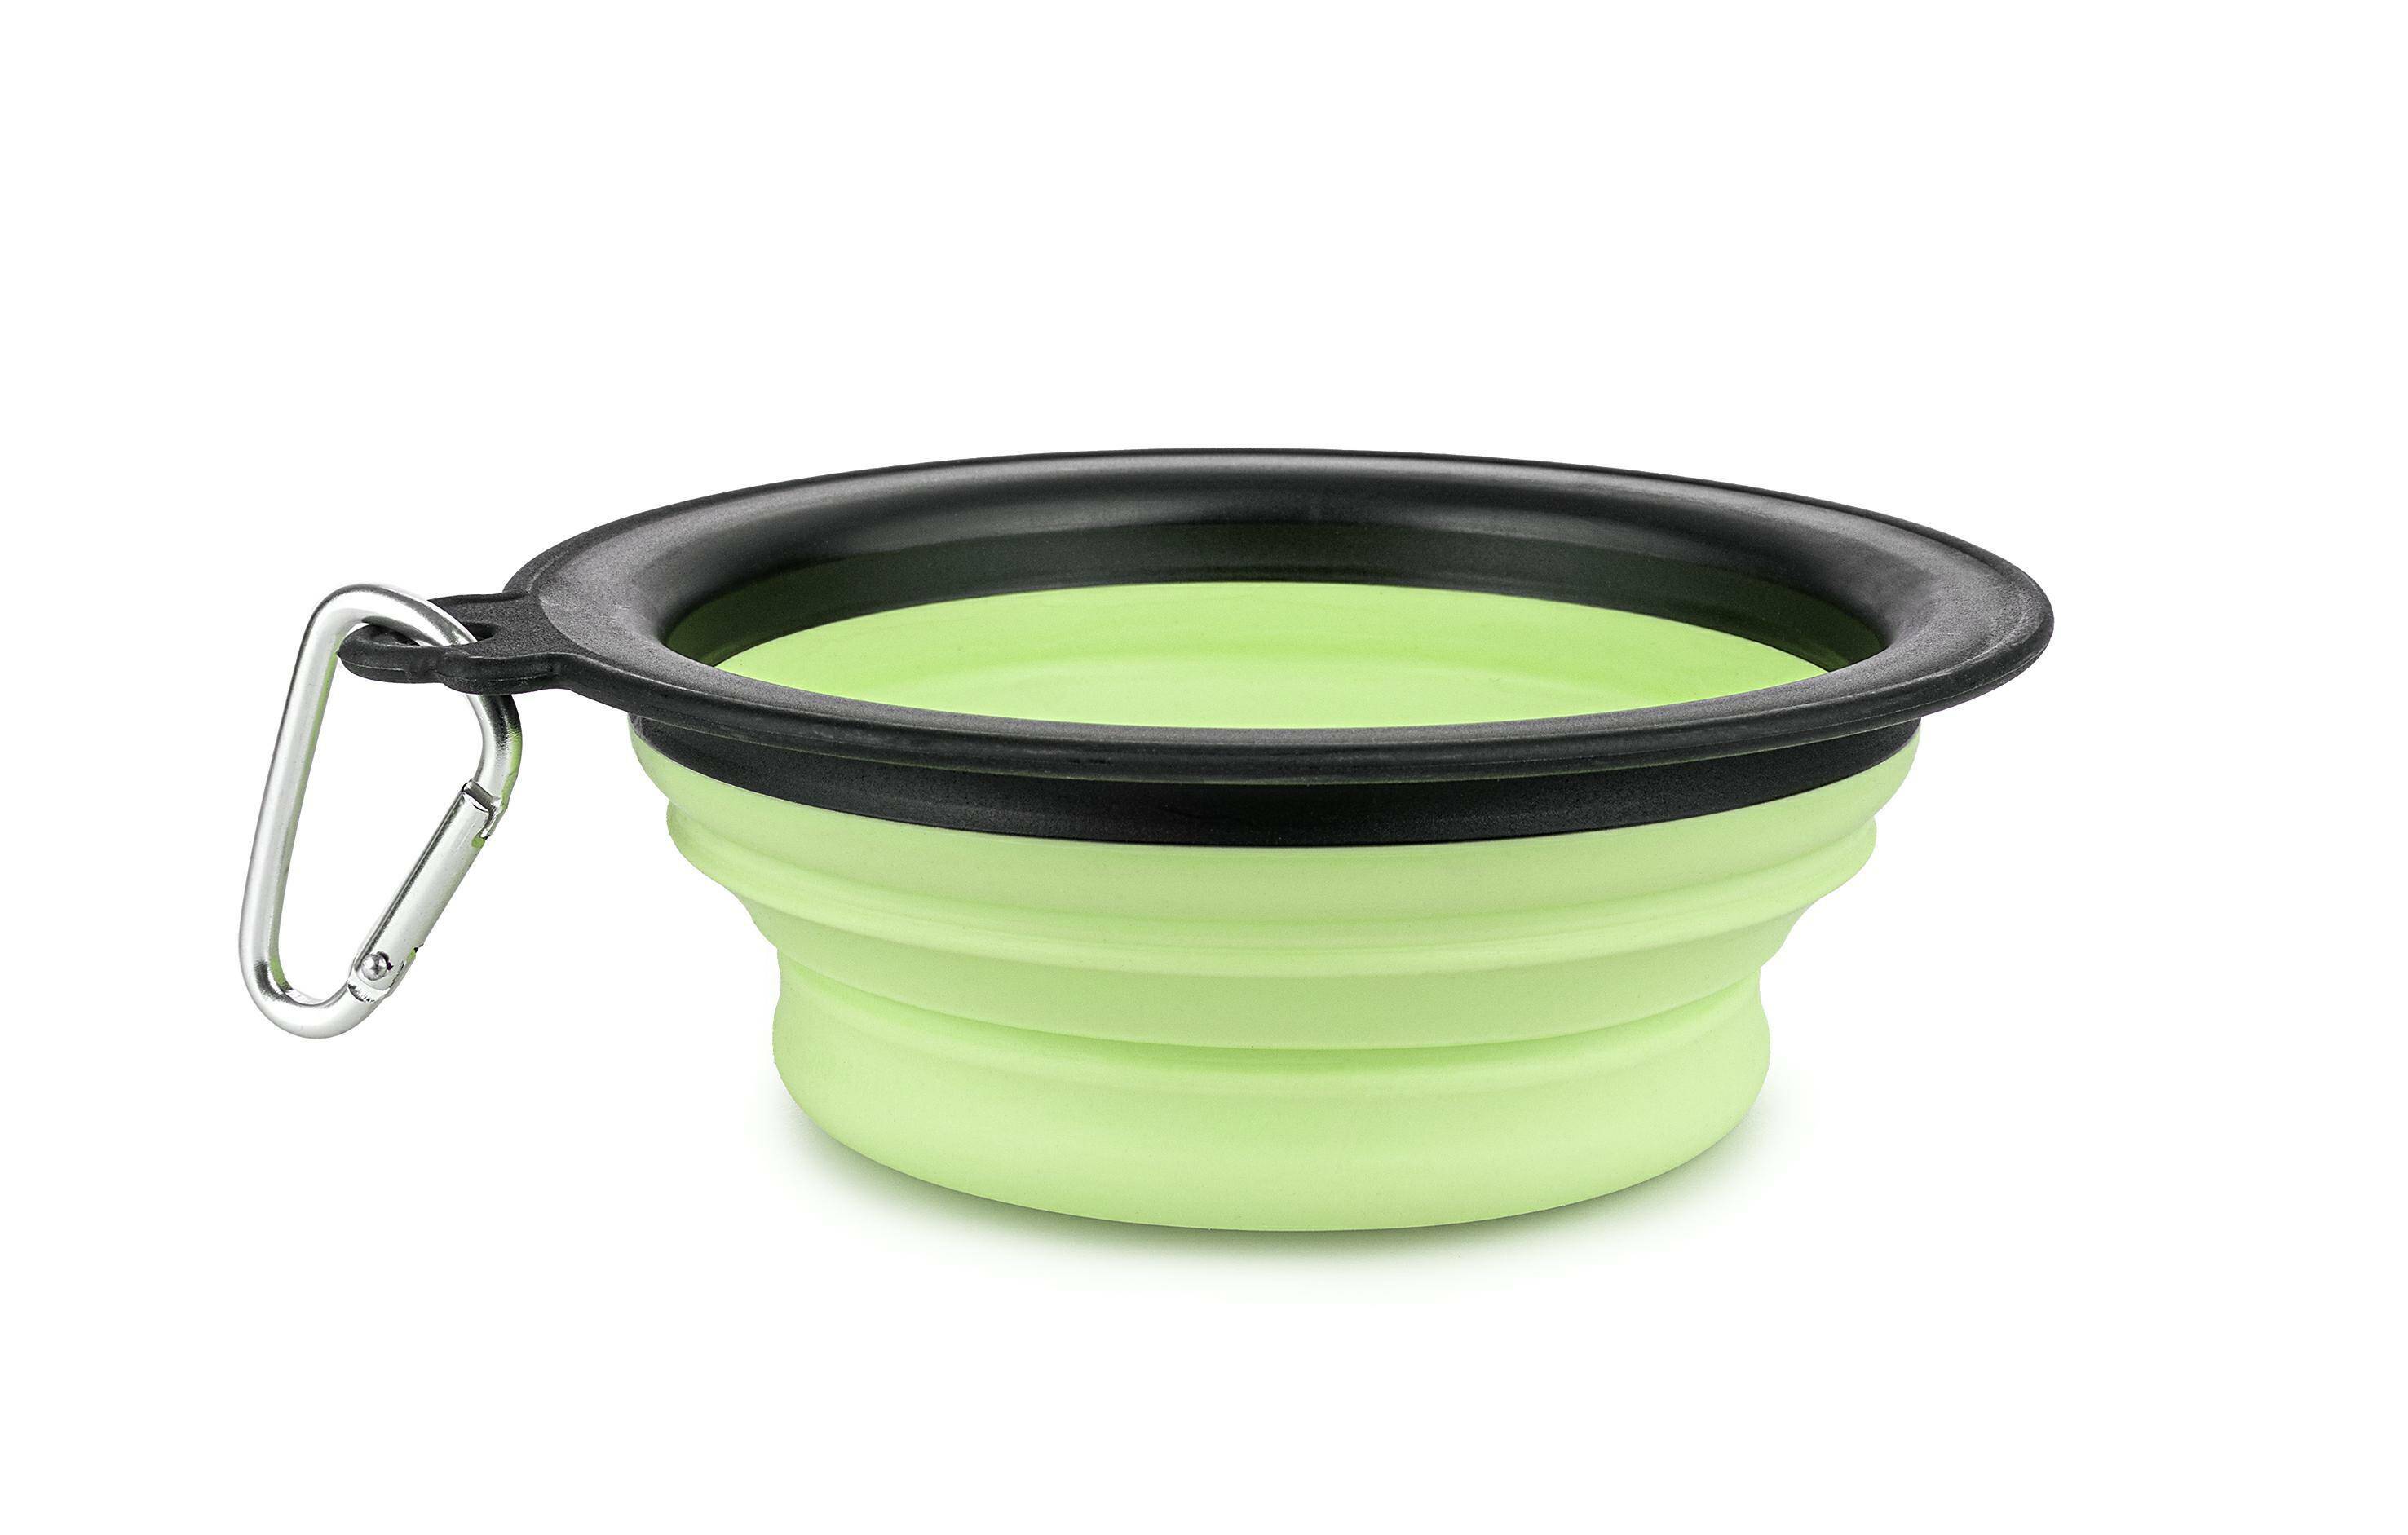 Collapsible travel bowl green M197 (Z-M197HT)